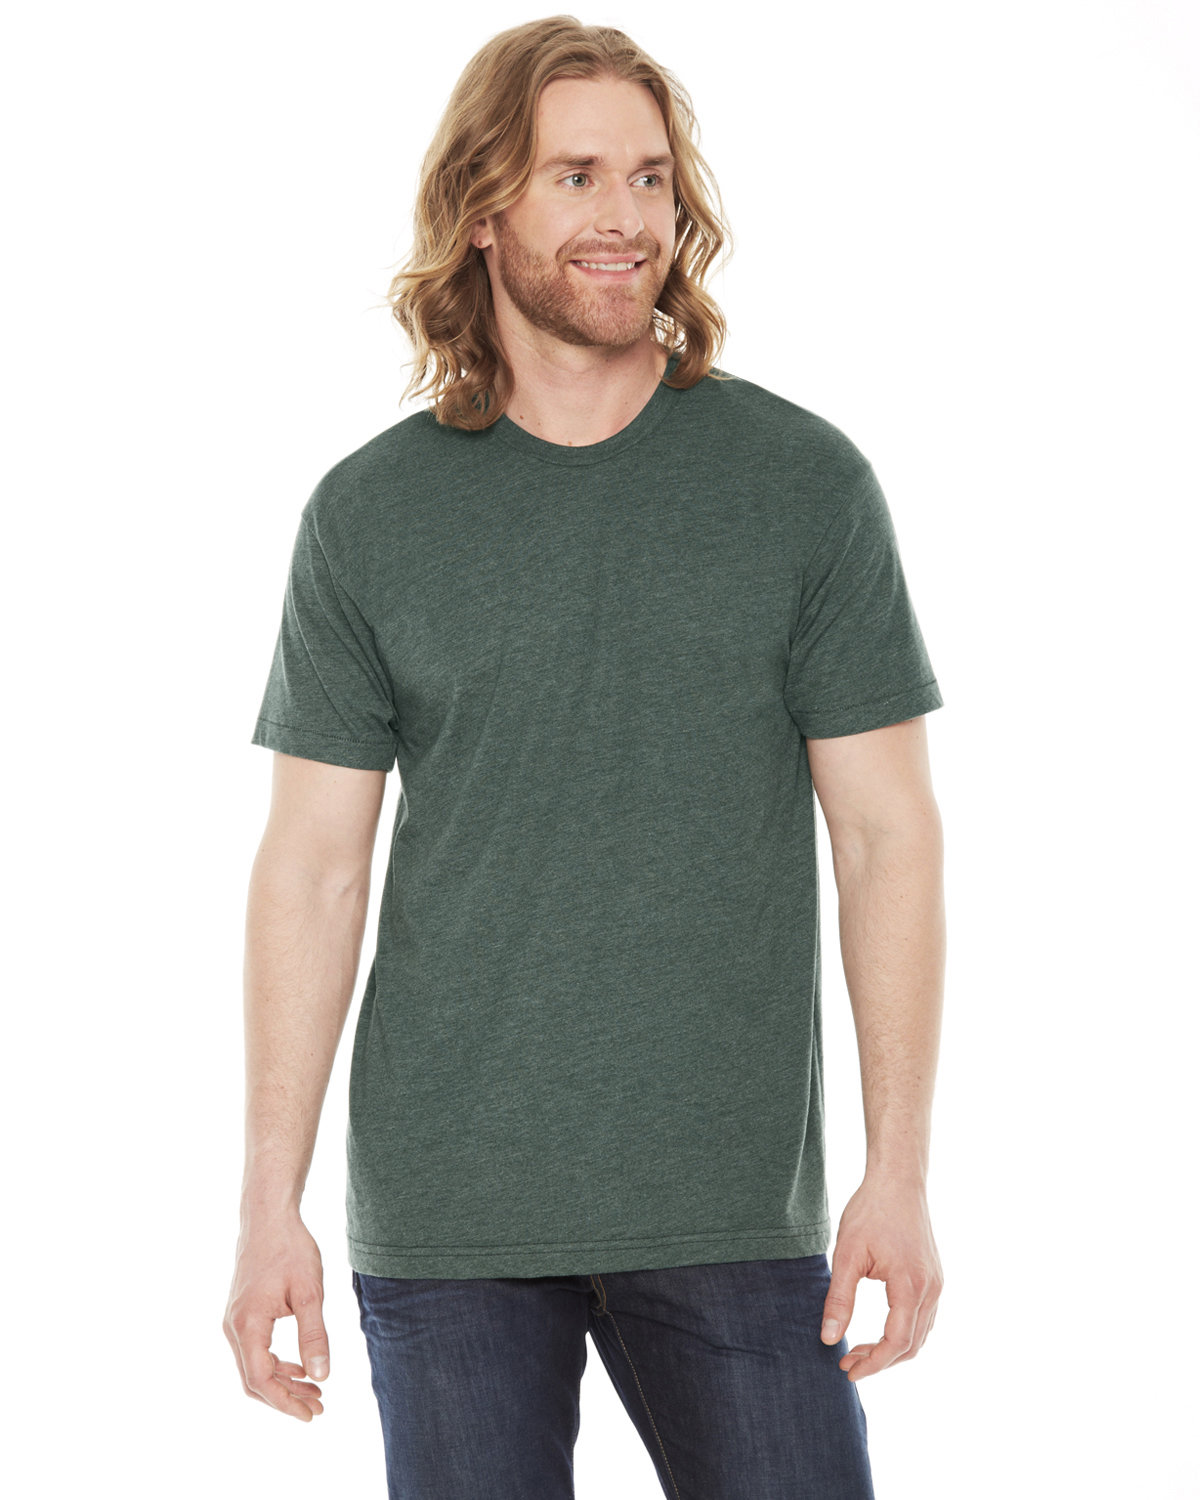 American Apparel Unisex Classic T-Shirt HEATHER FOREST 